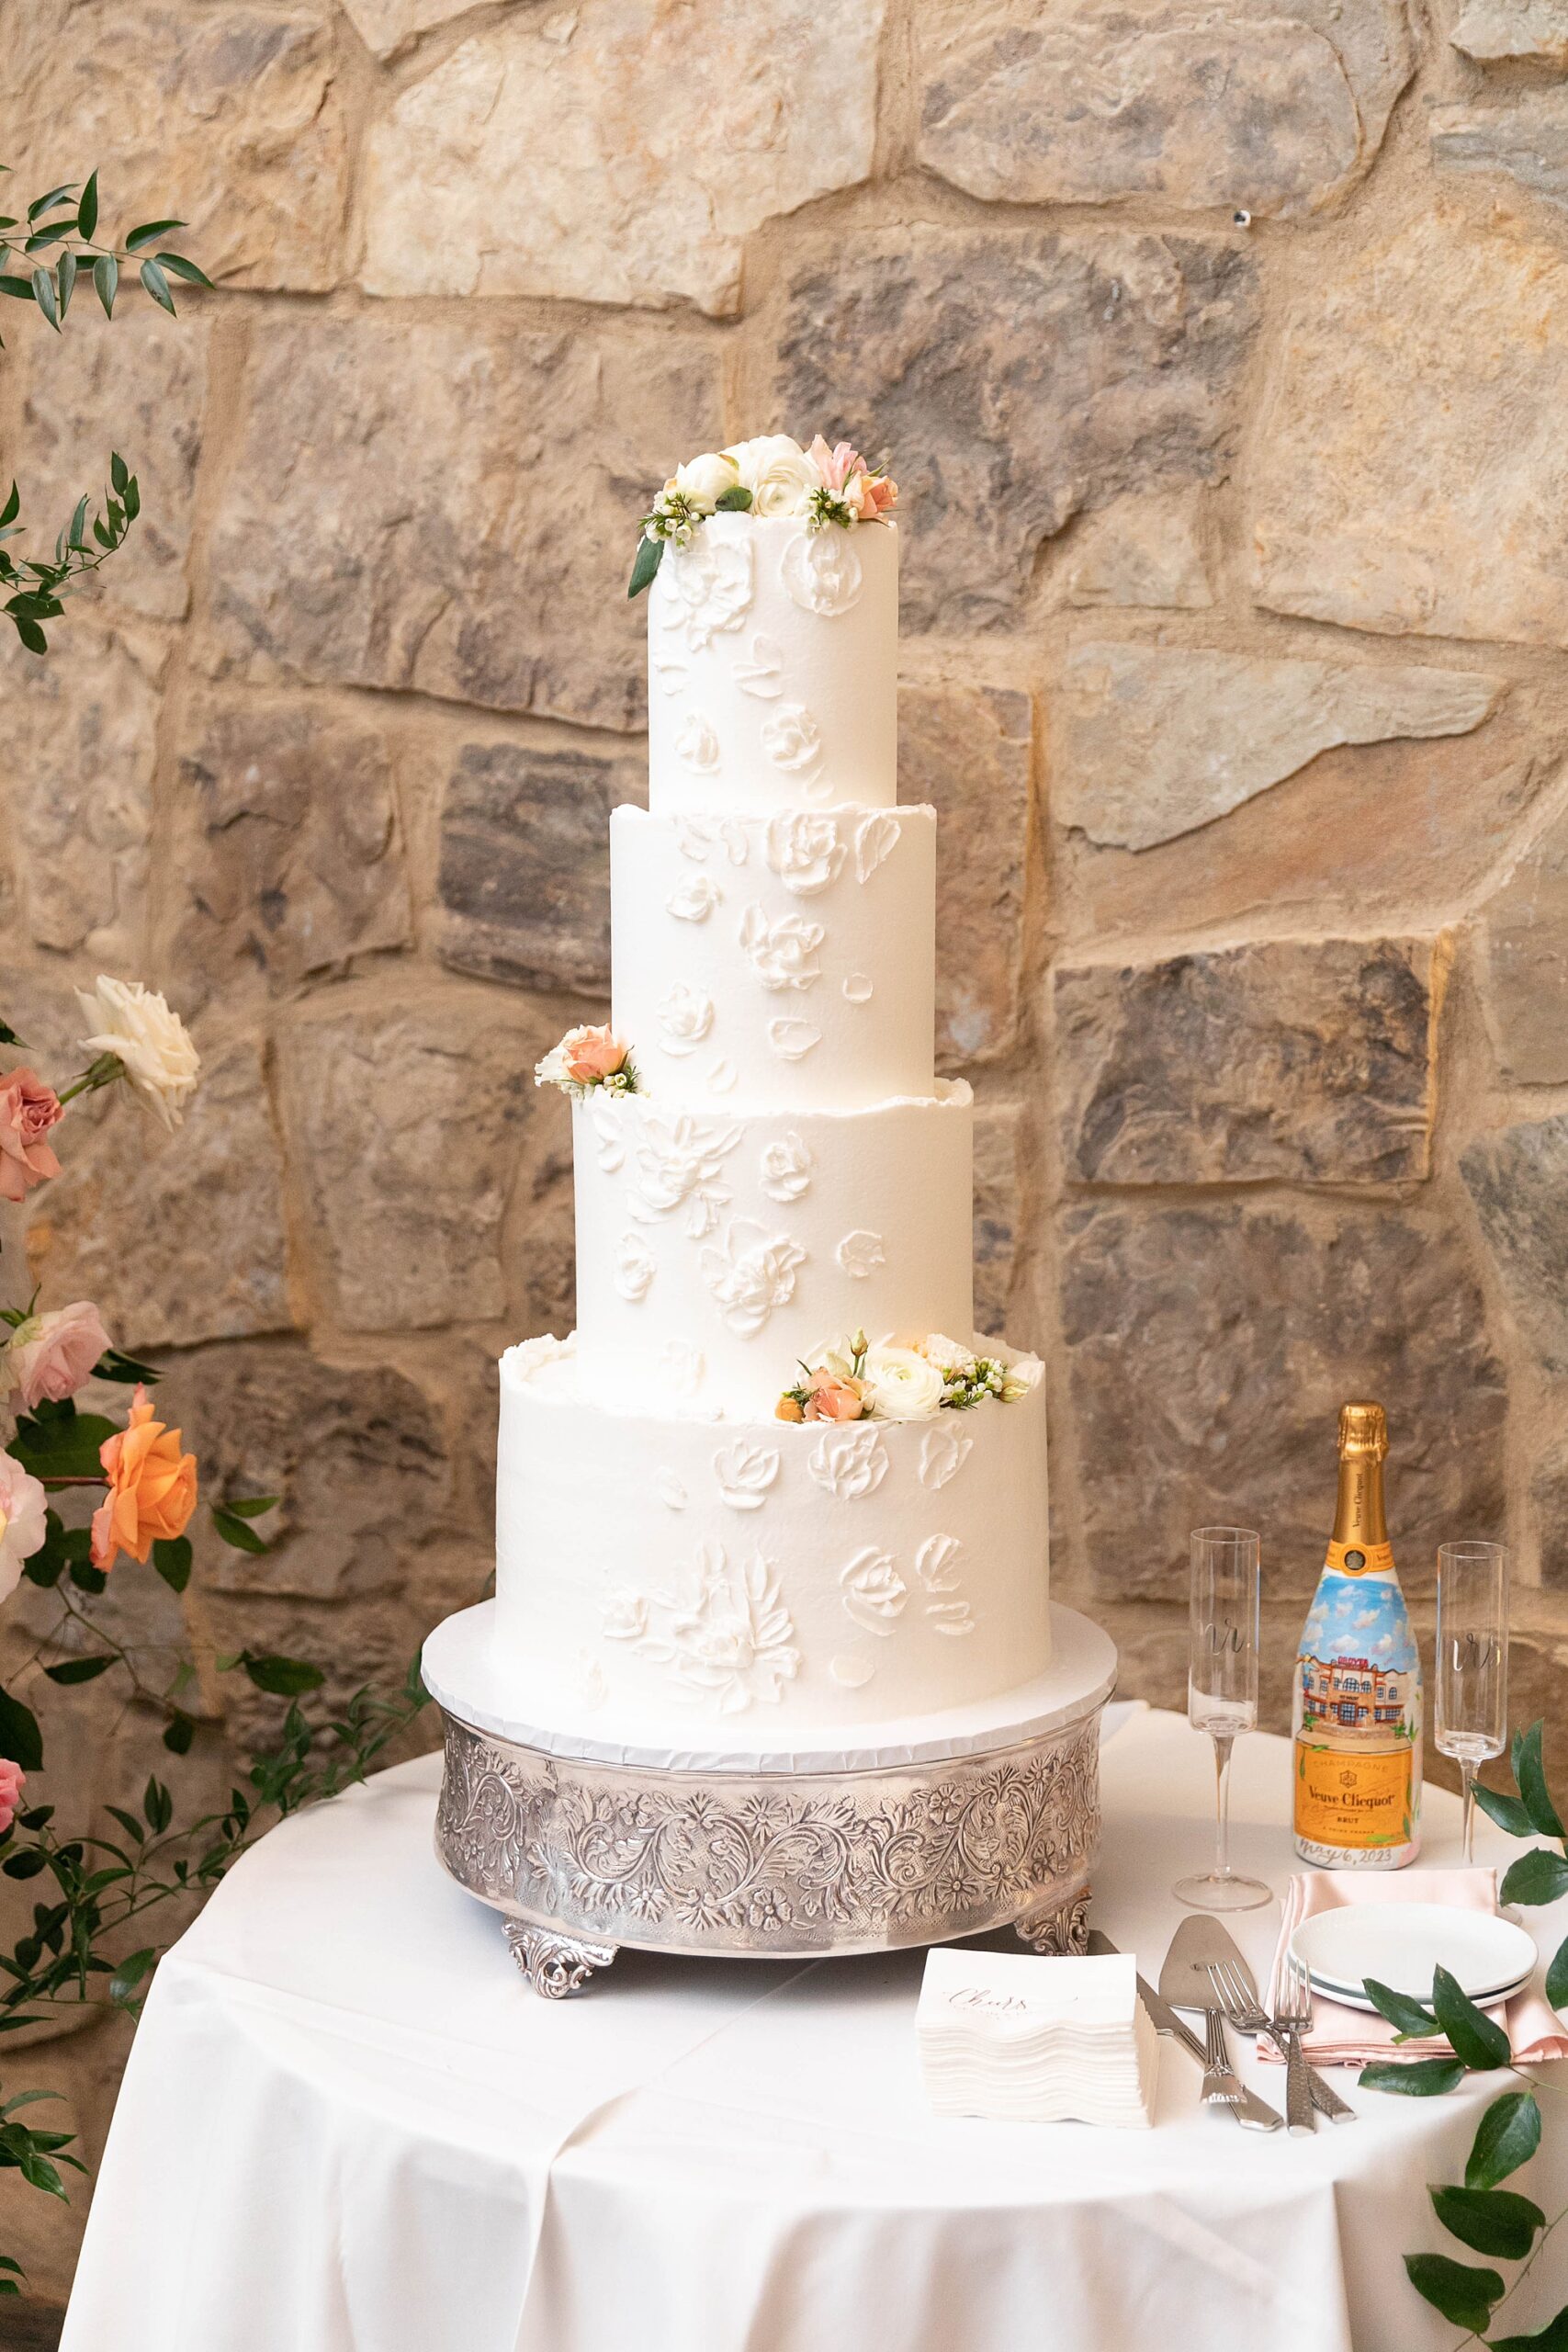 tiered white wedding cake on silver platter for wedding reception in the barn at the Hotel Drover